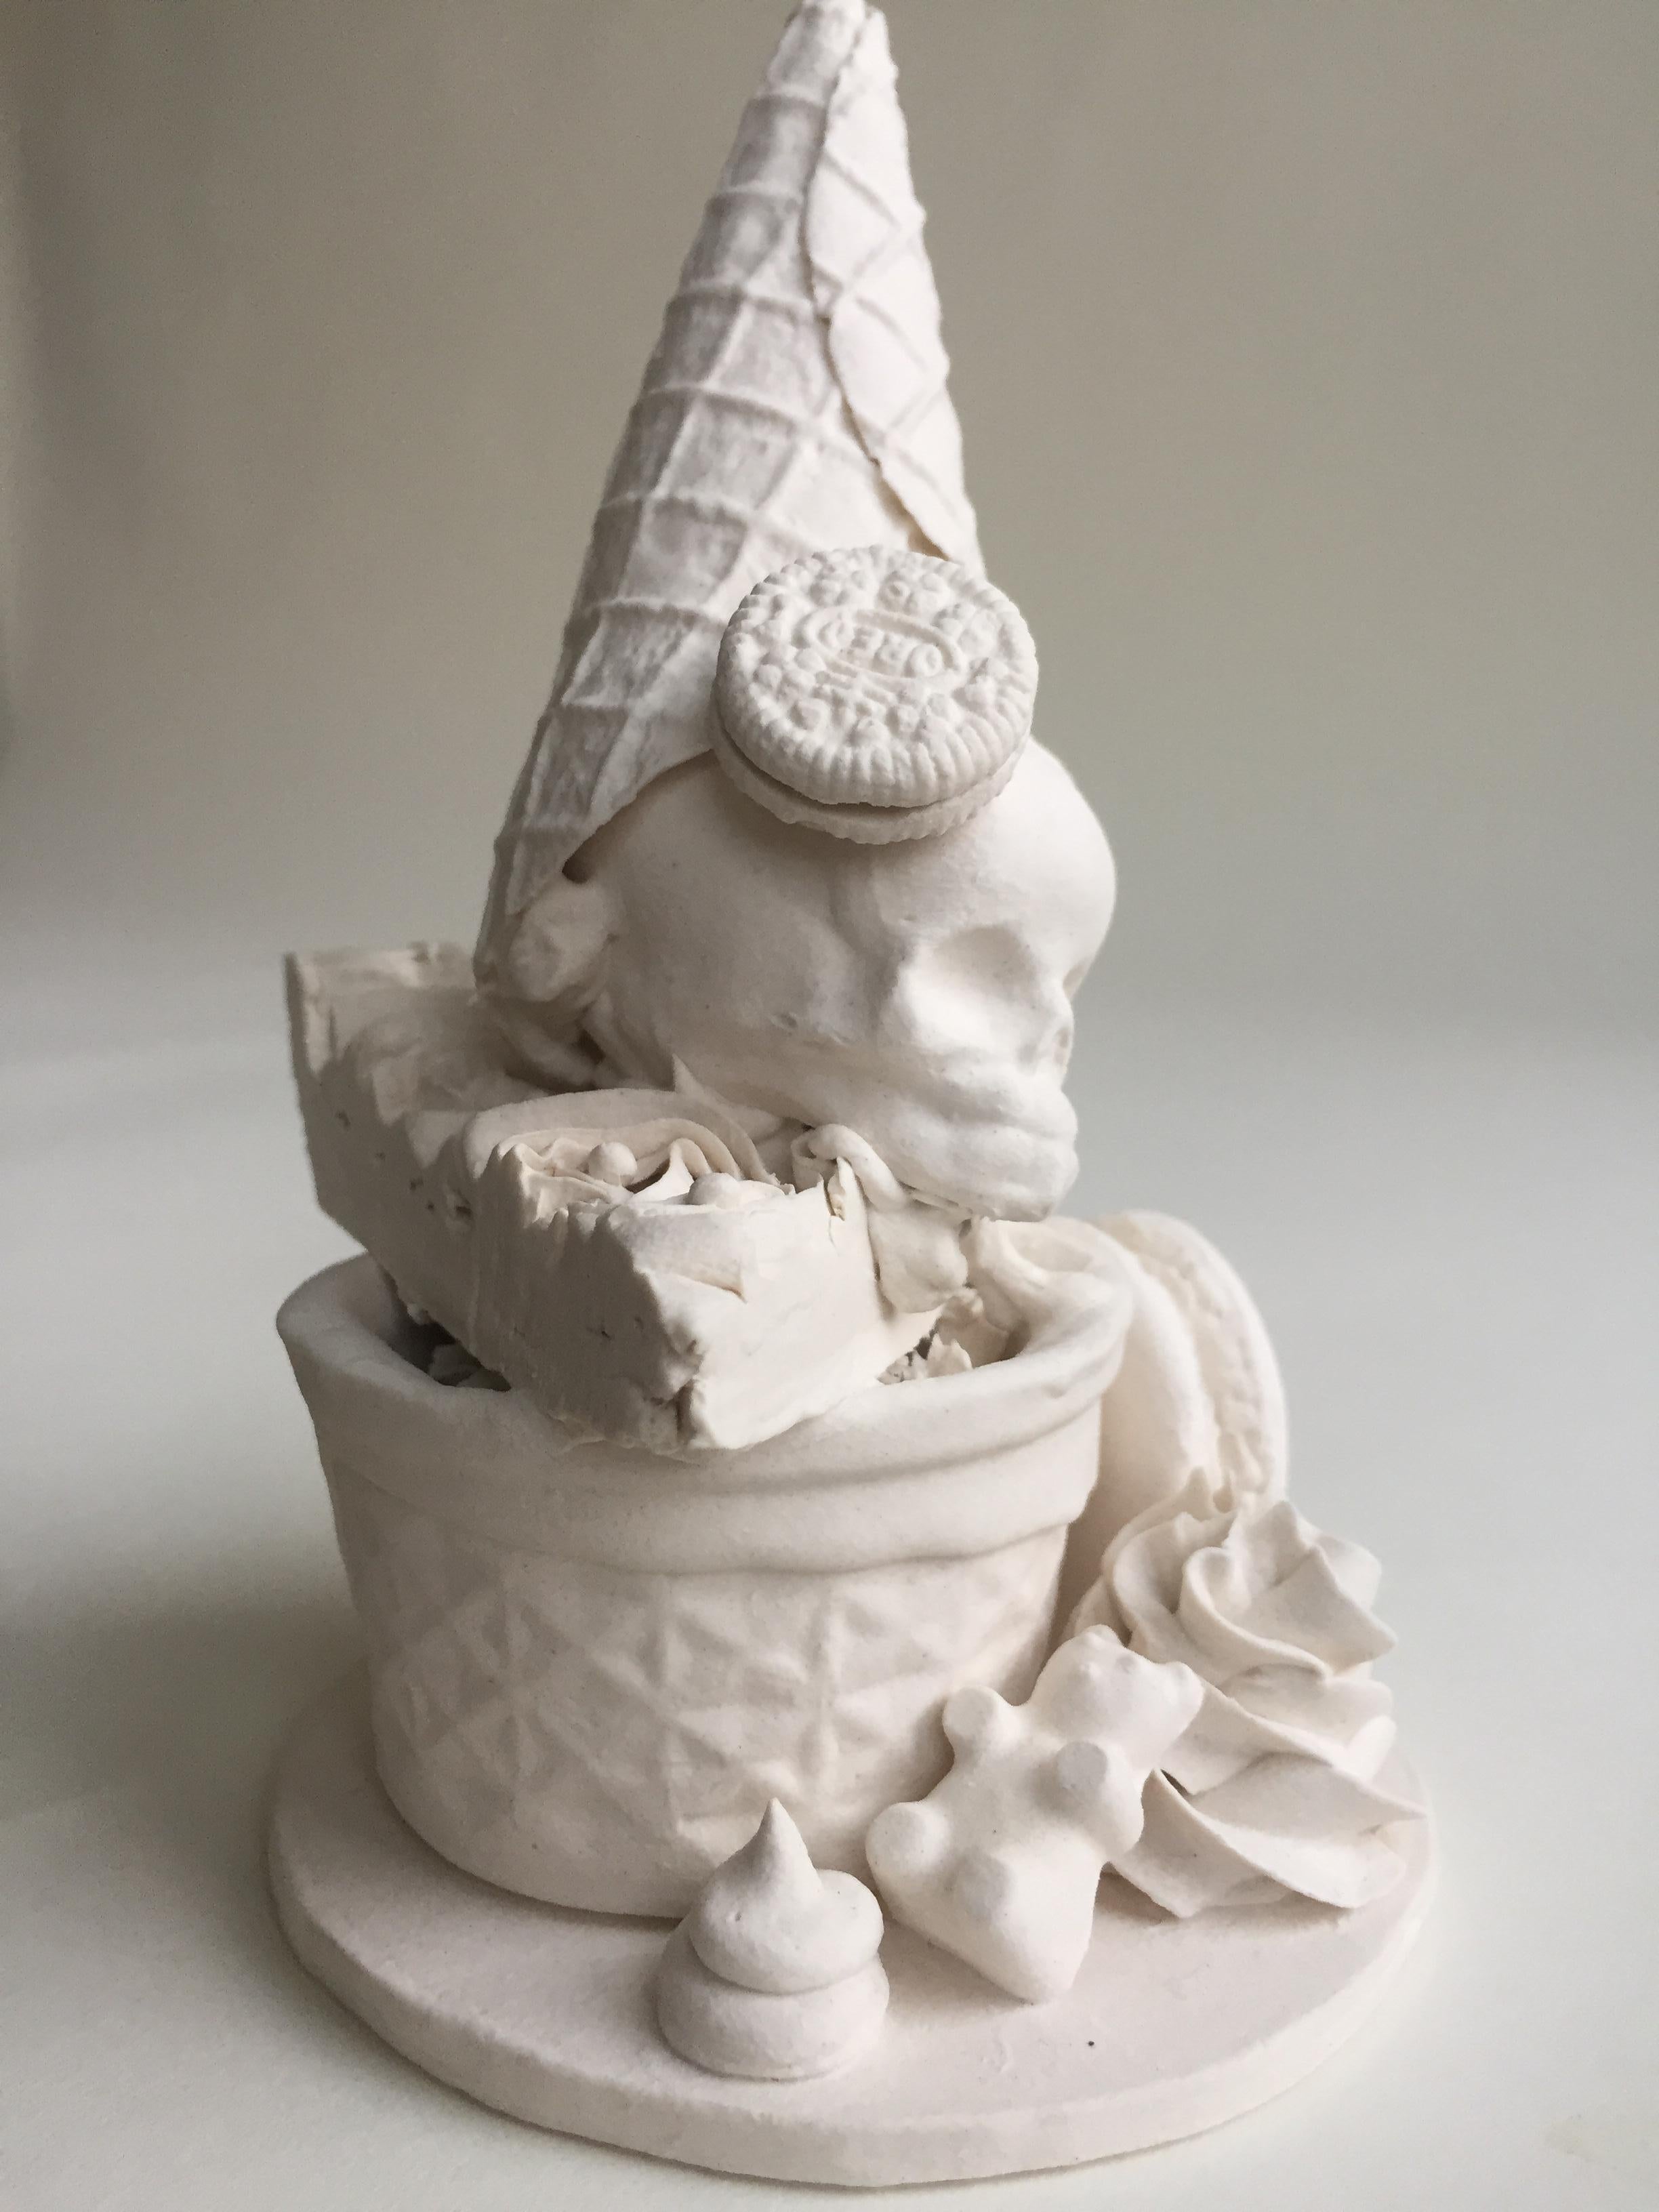 This piece consists of a porcelain slip-casted jar base, intricately topped with slip-casted fetus skulls, donut, and sweets.  Decorated with hand piped details and hand rolled sprinkles.

Jacqueline Tse channels her love-hate relationship with